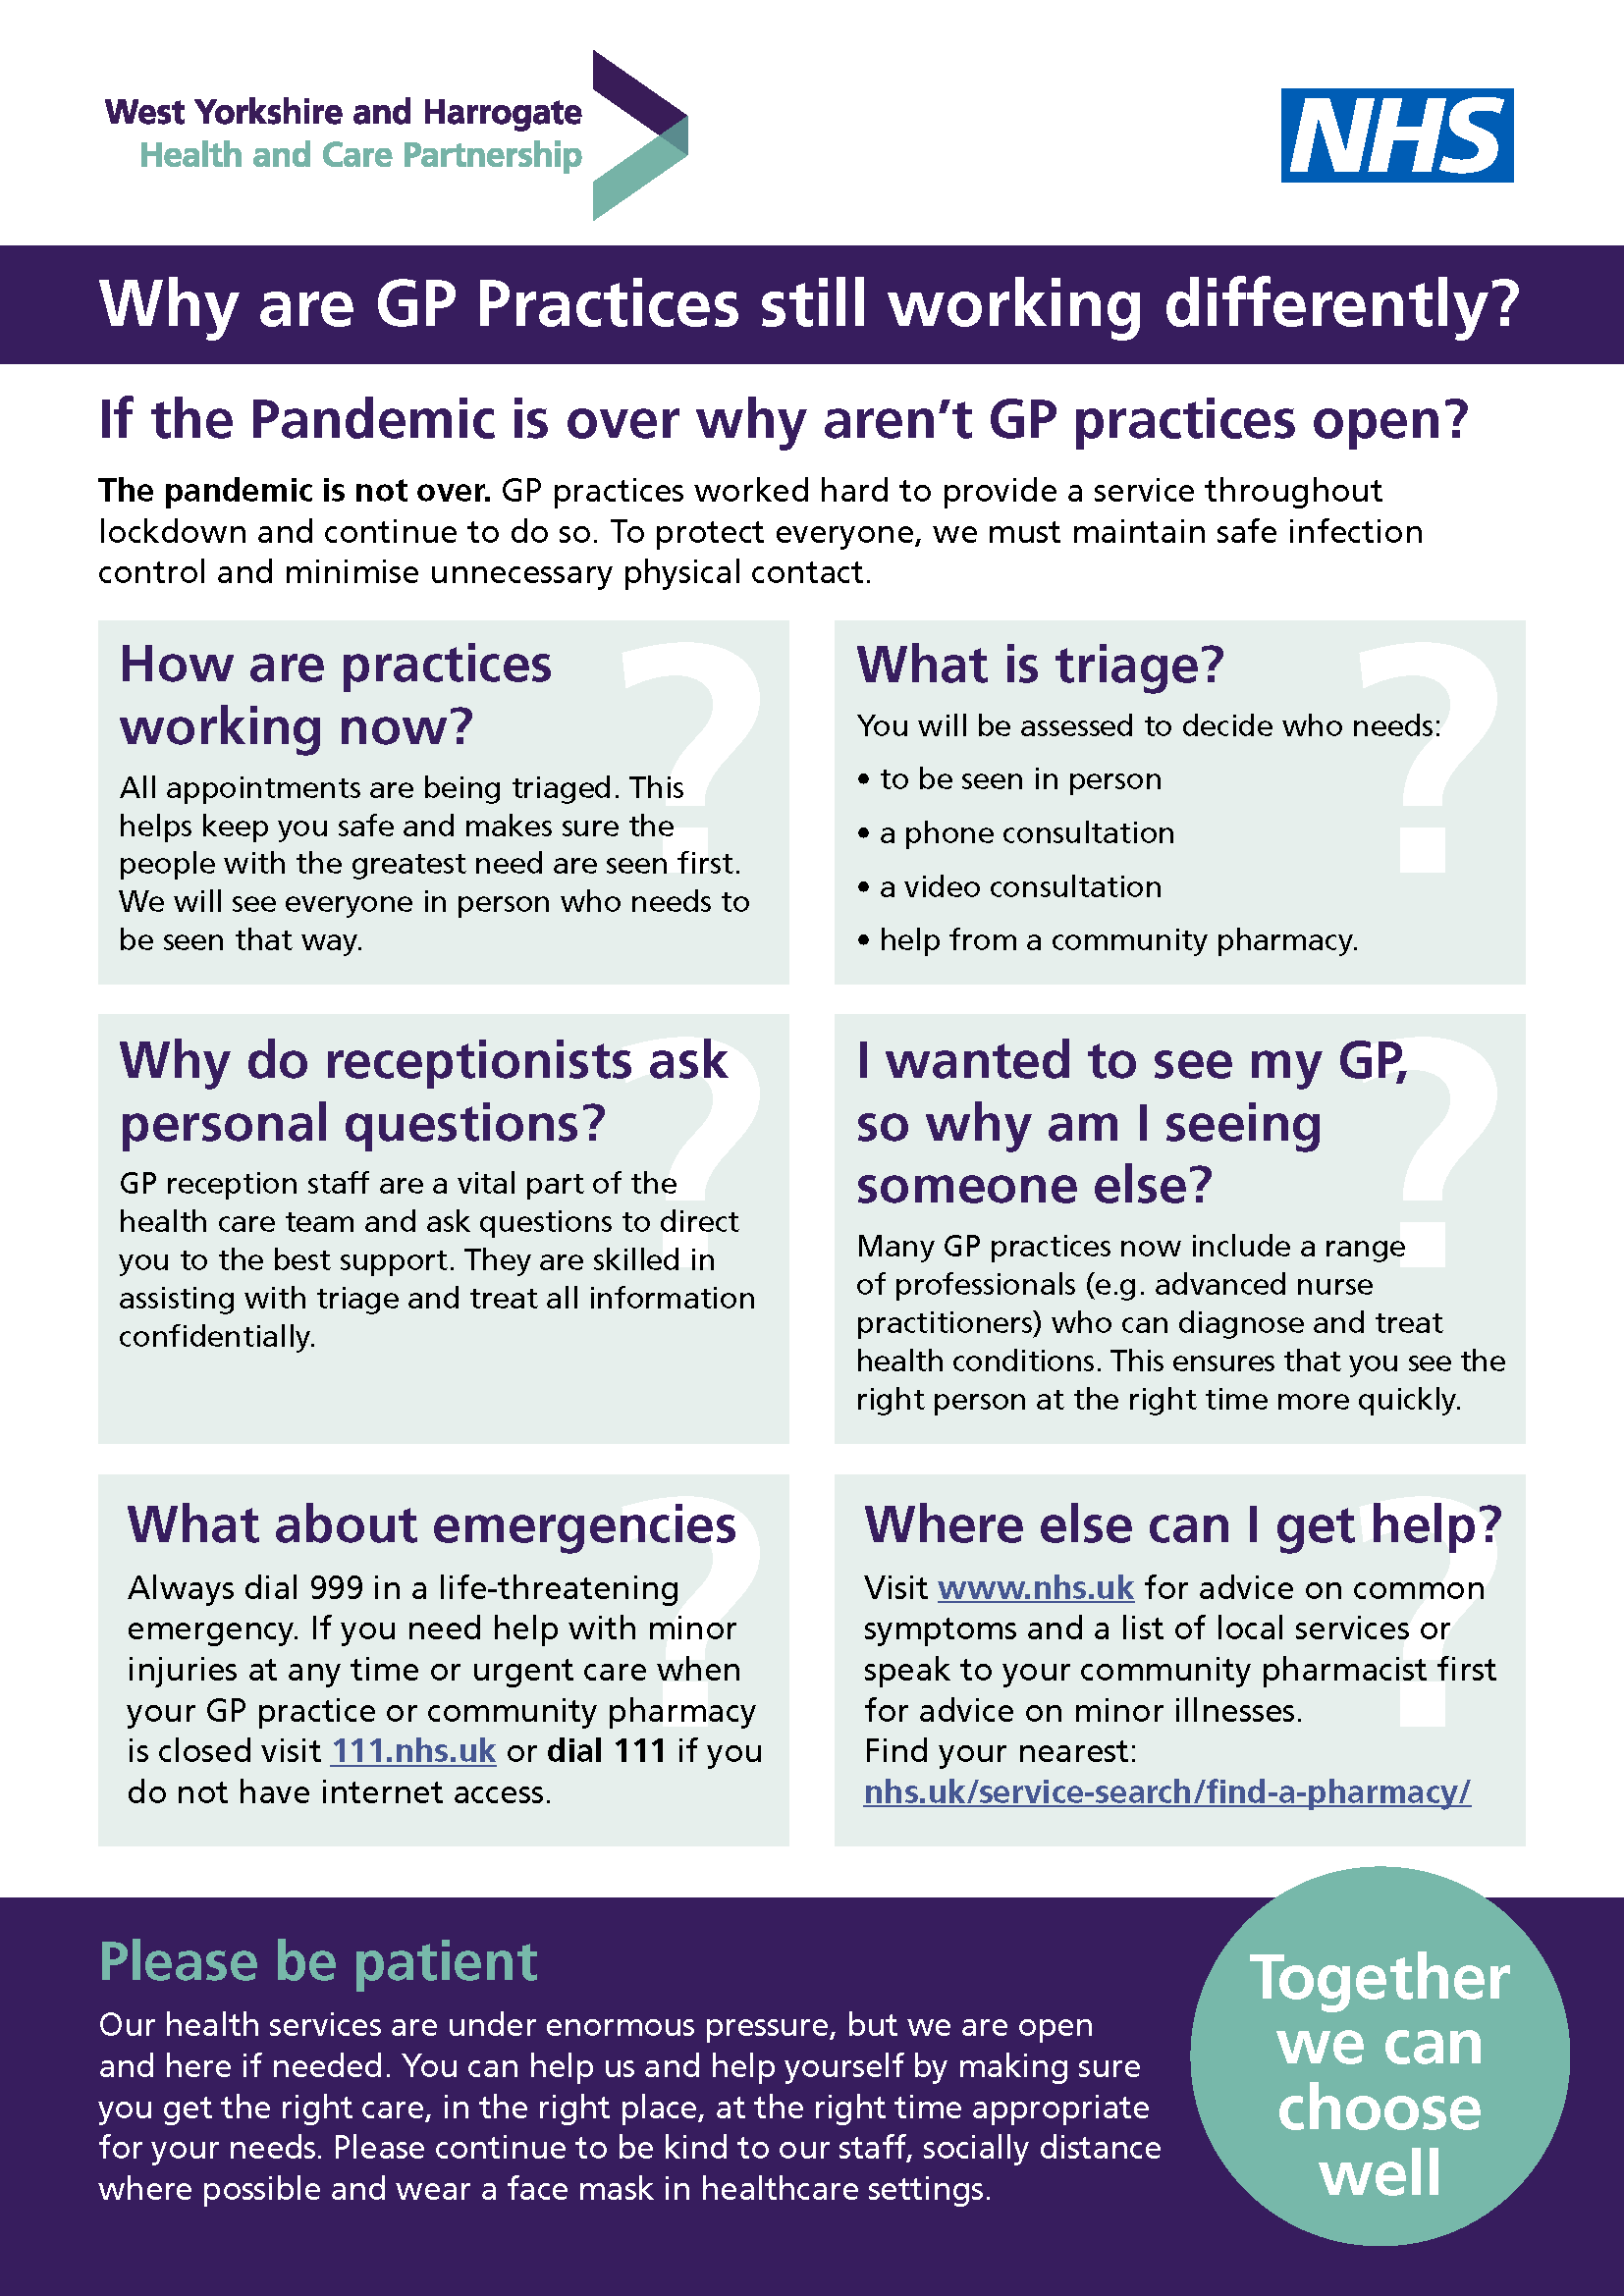 1. Why are GP Practices still working differently infographic12392